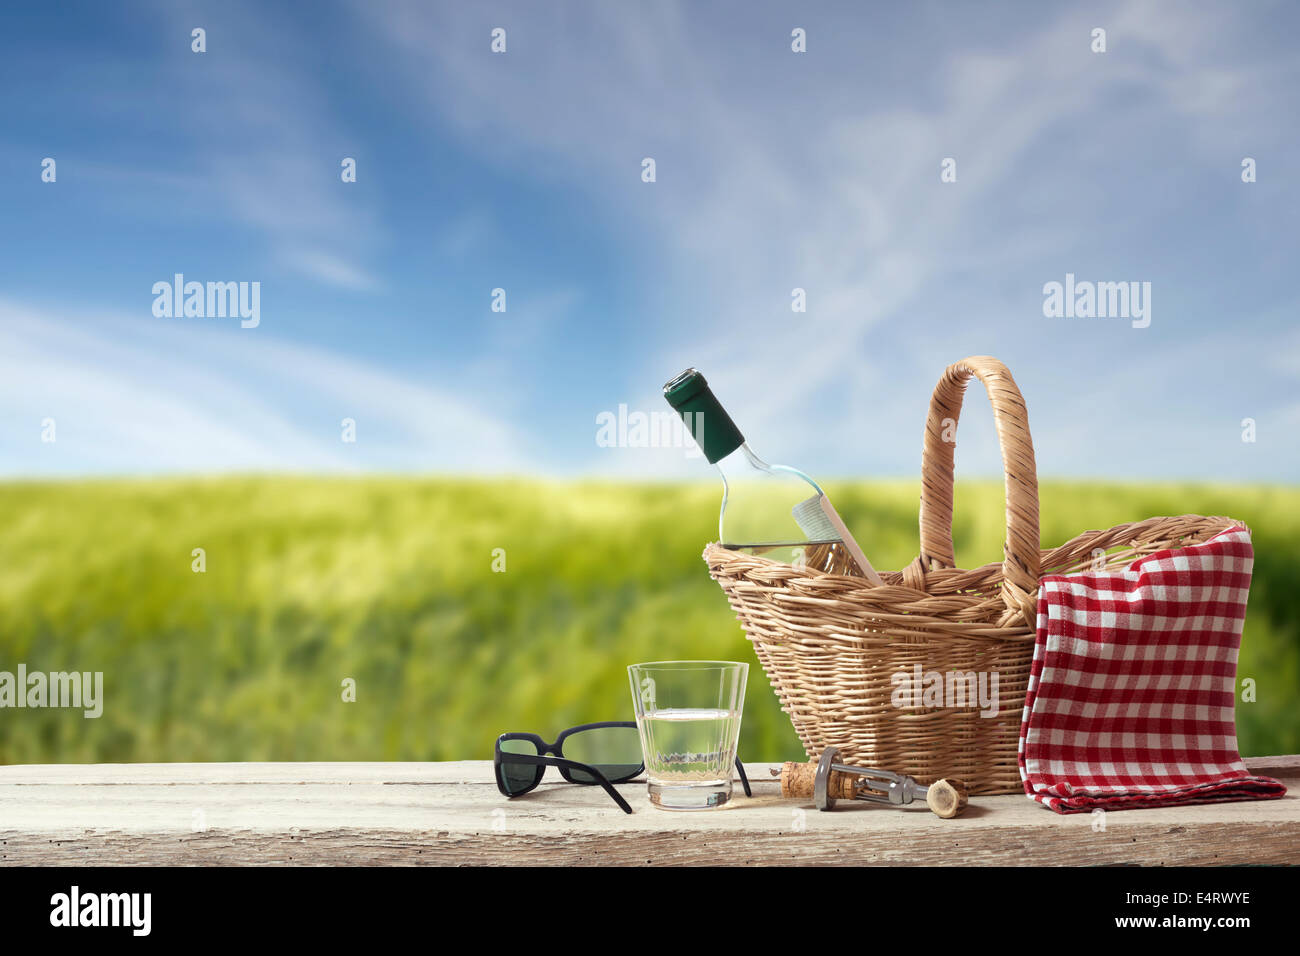 Picnic for a single Person in a countryside Landscape Stock Photo